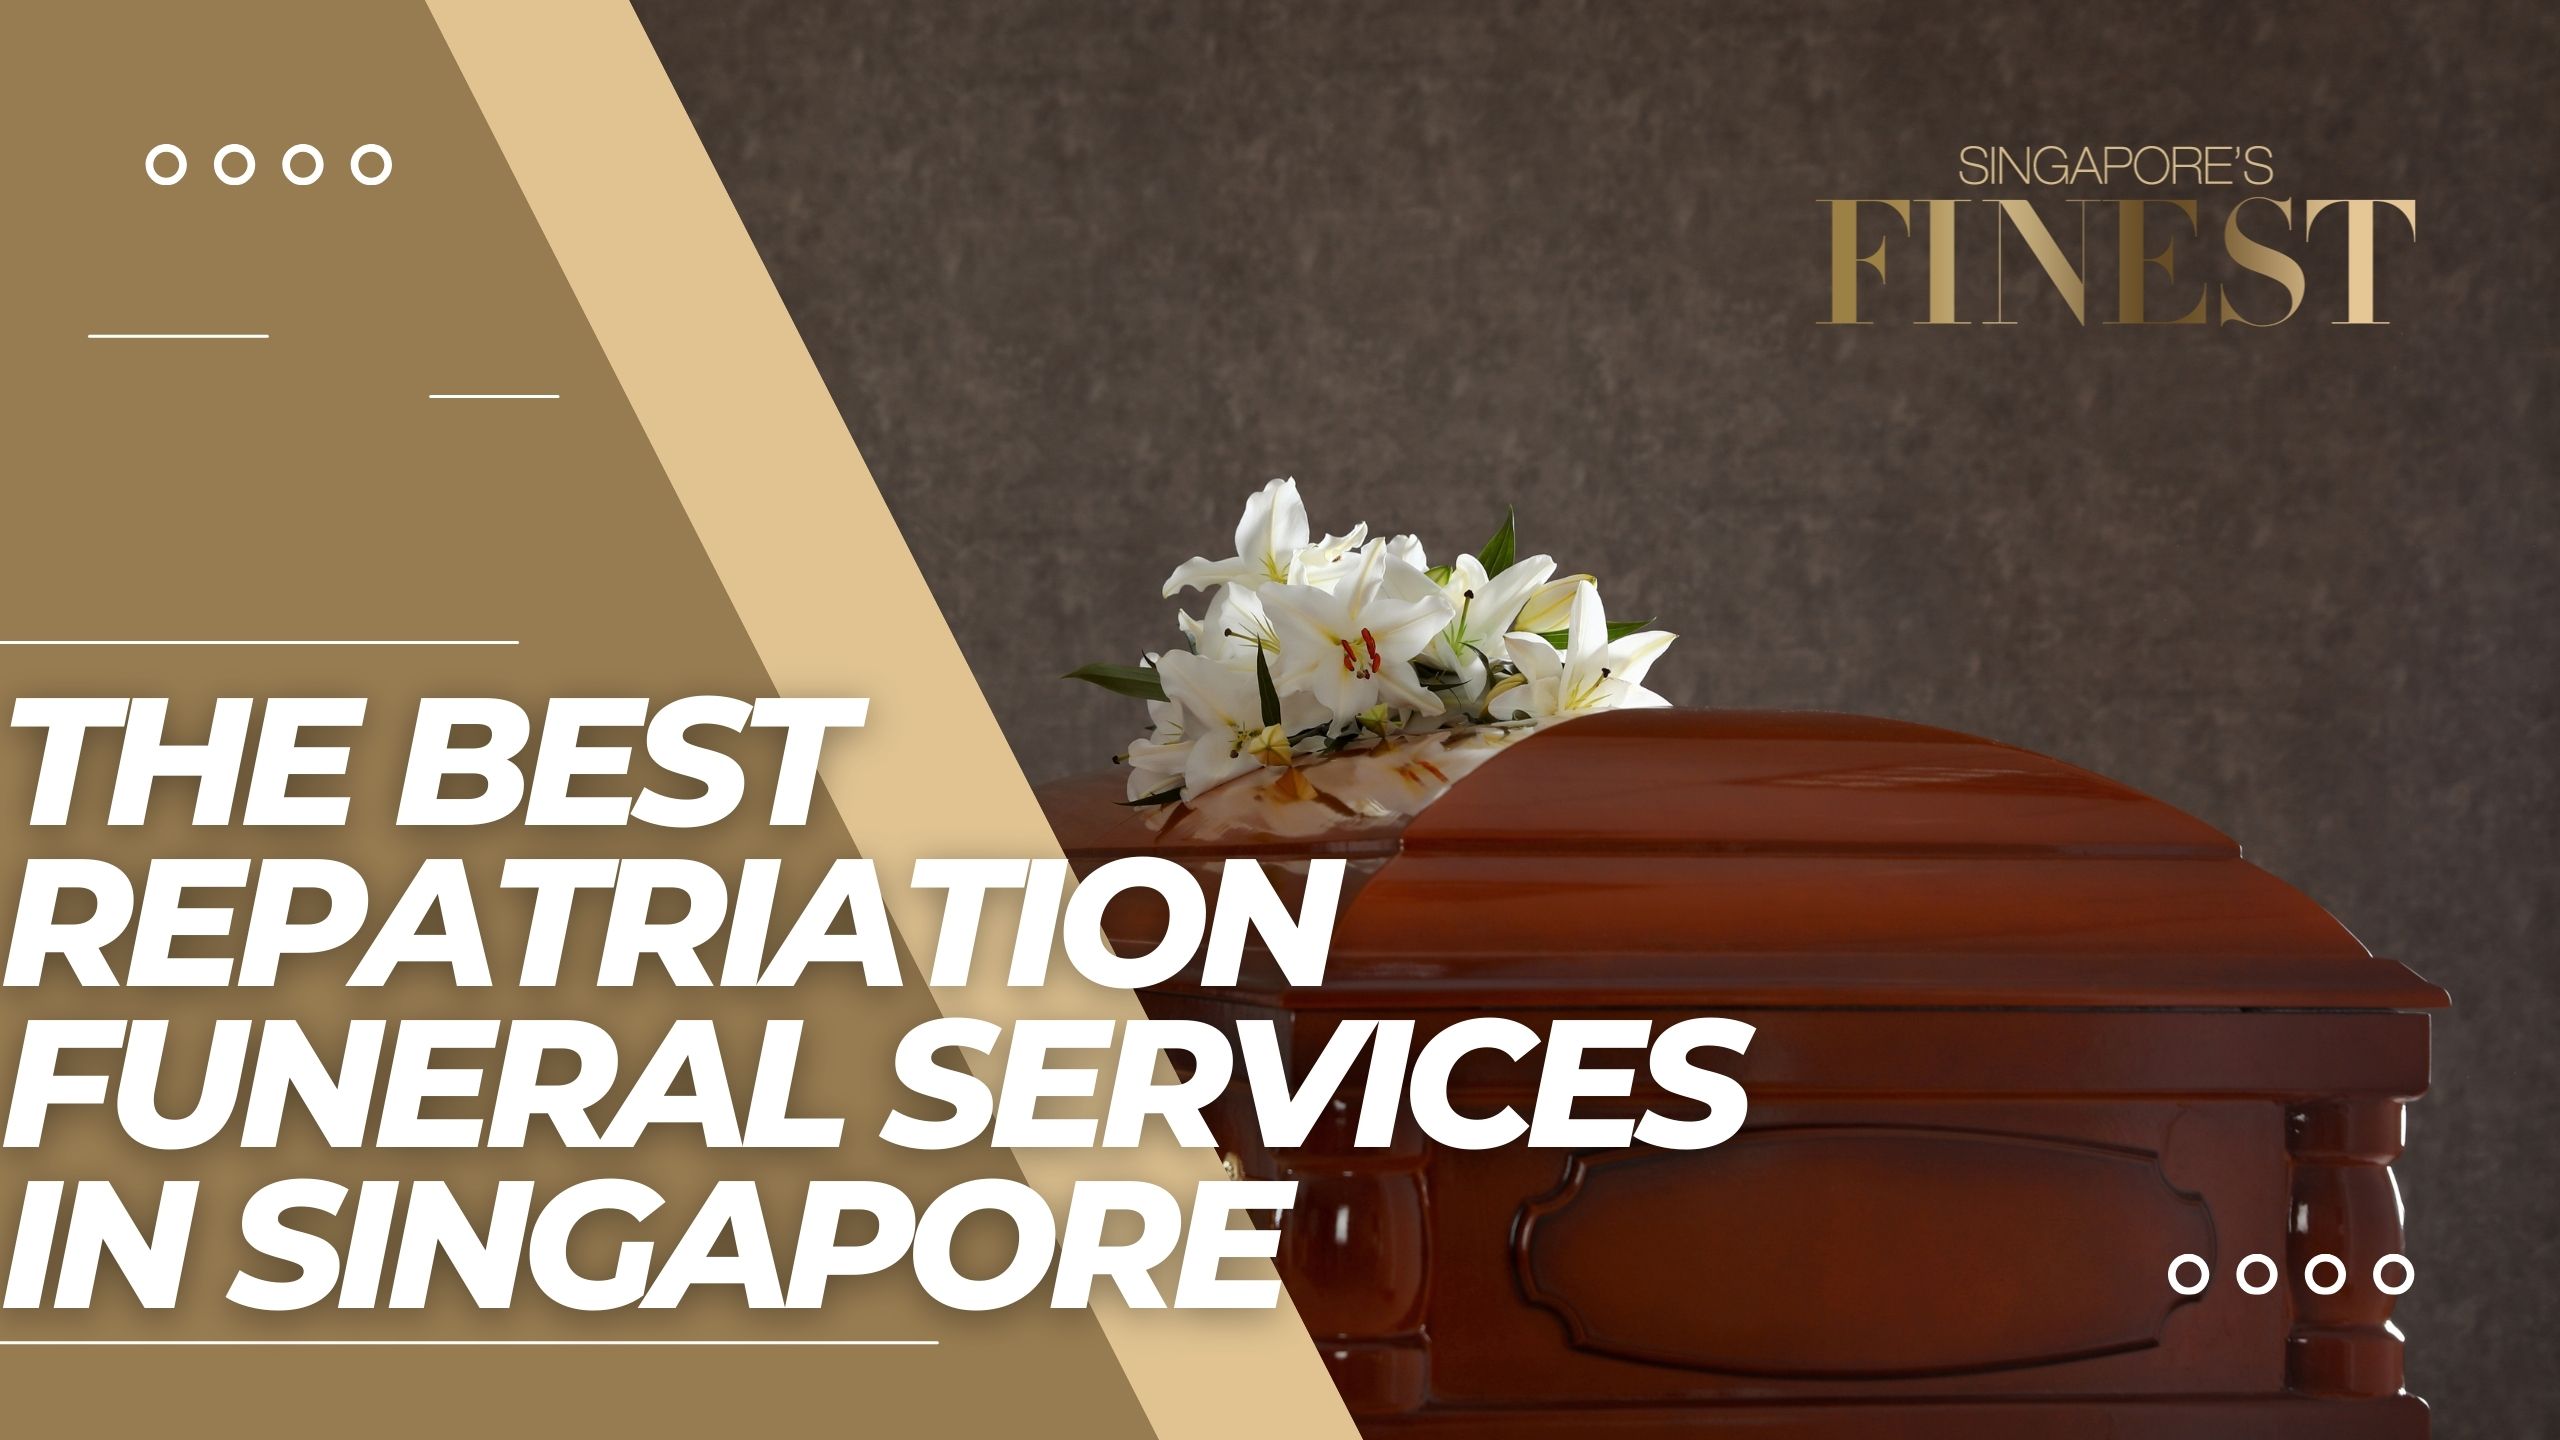 The Finest Repatriation Funeral Services in Singapore